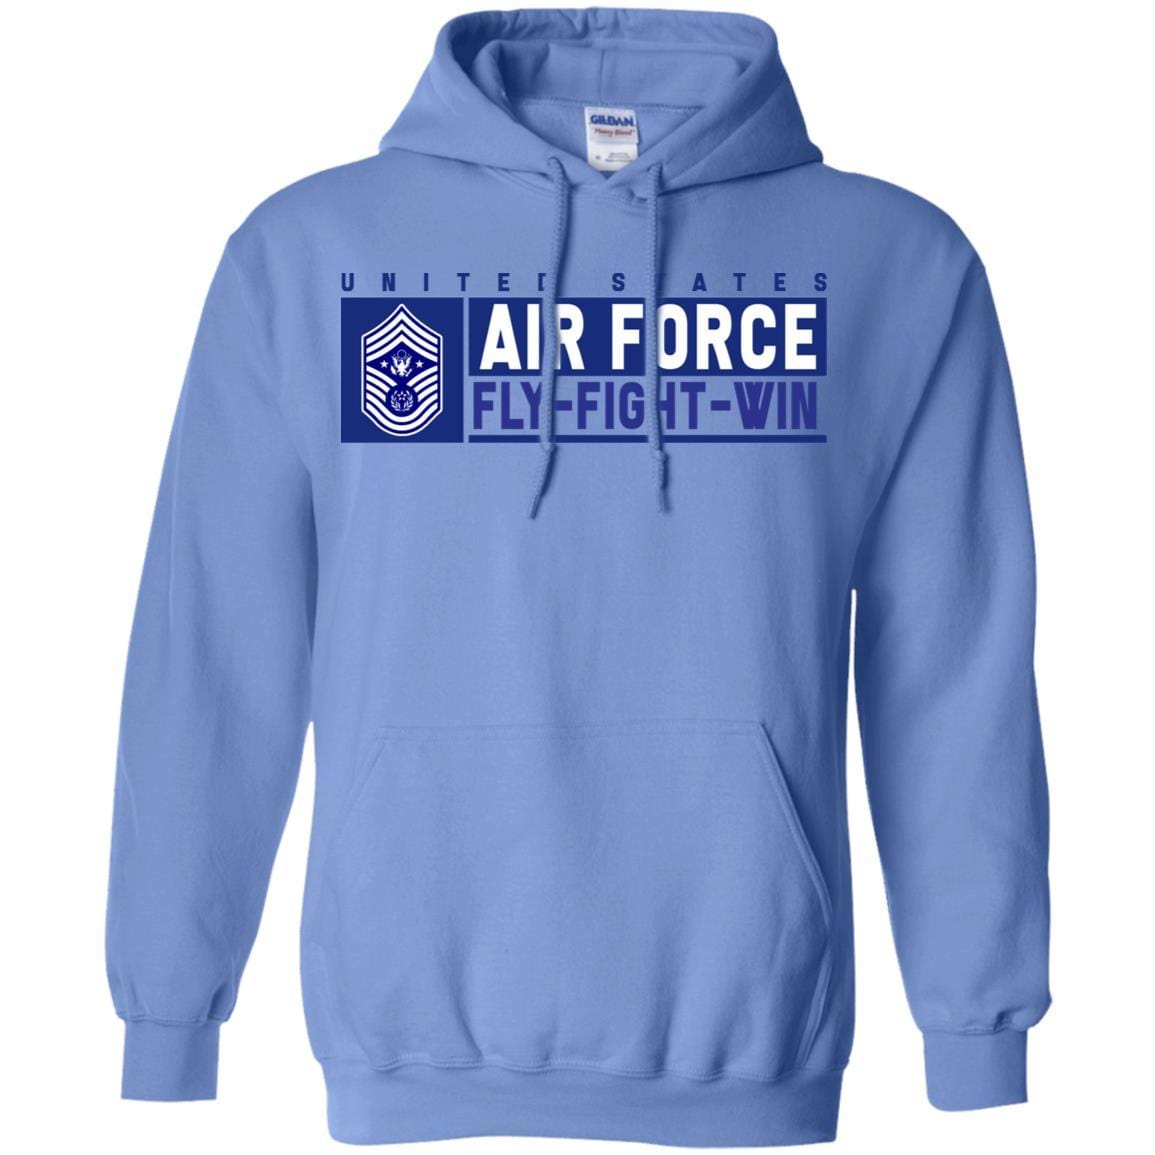 US Air Force E-9 Chief Master Sergeant Of The Air Force Fly - Fight - Win Long Sleeve - Pullover Hoodie-TShirt-USAF-Veterans Nation